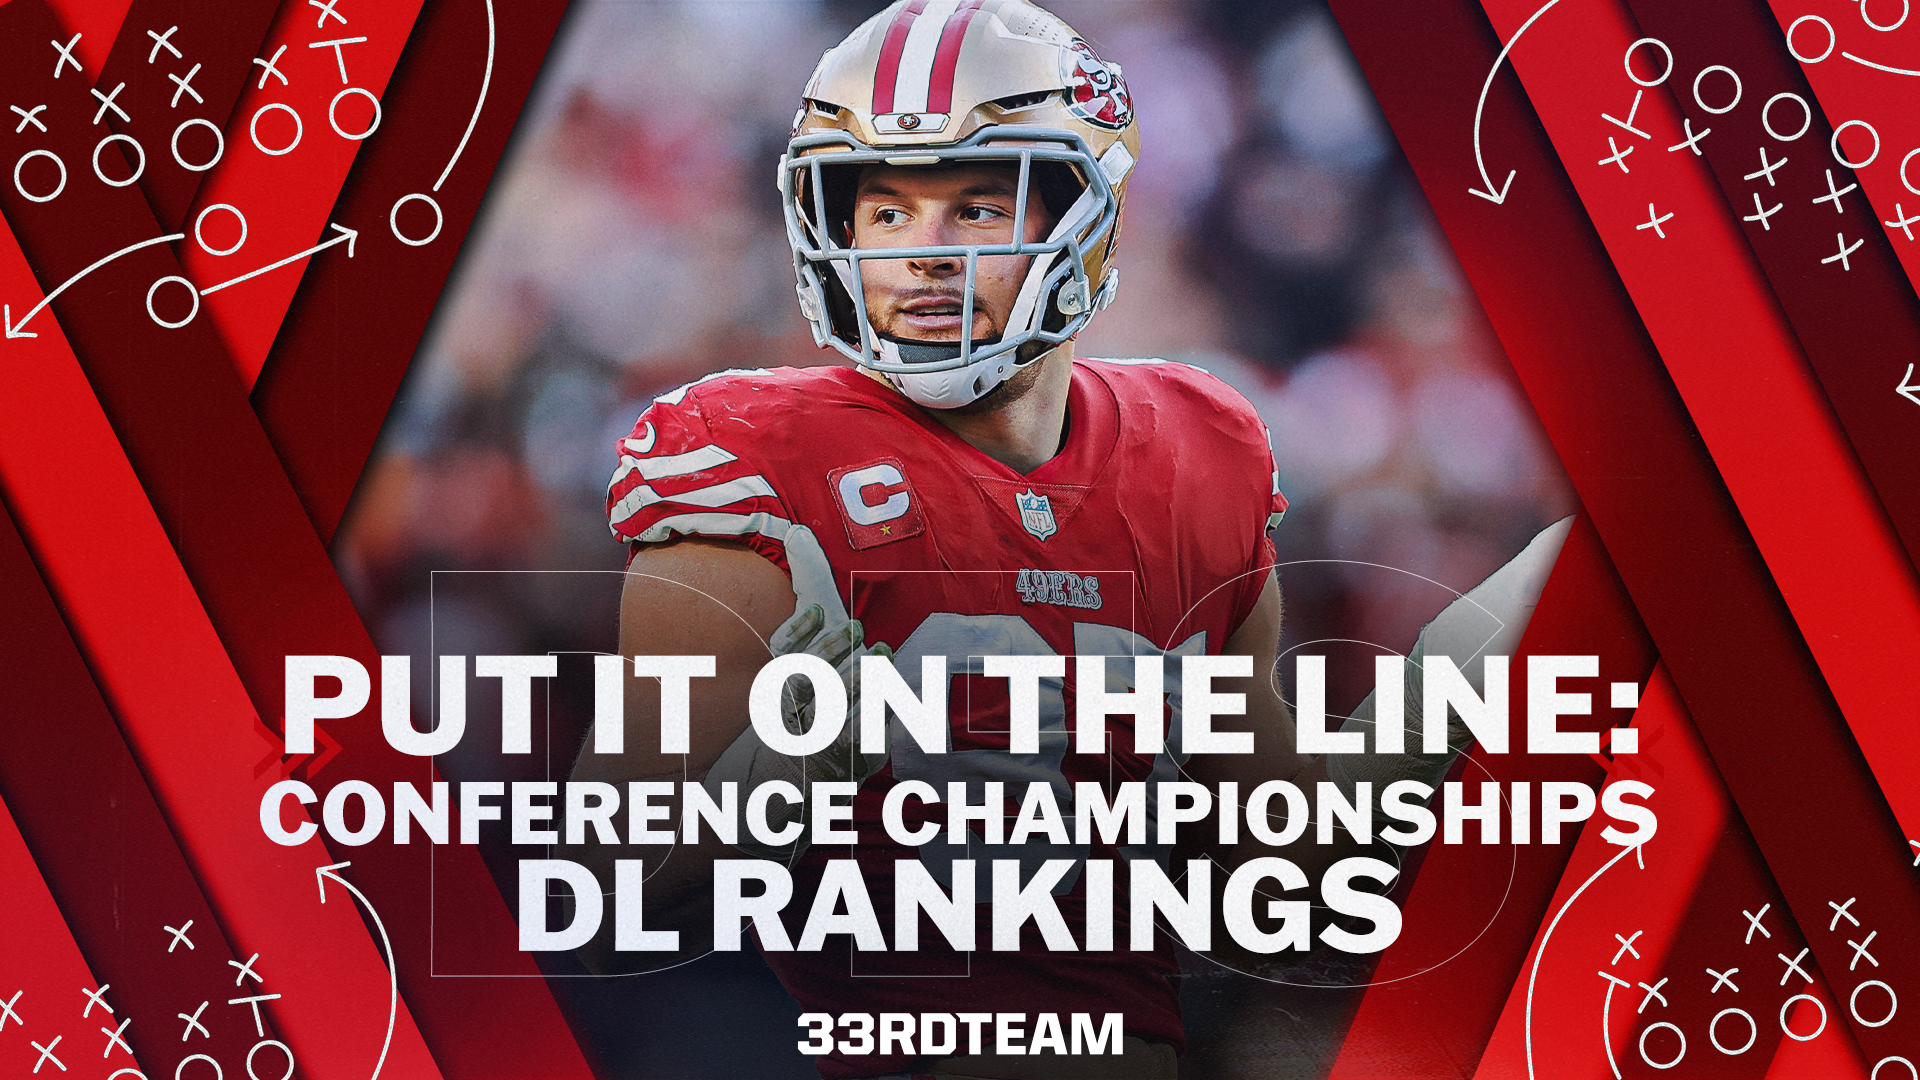 Put It On The Line: Conference Championship Defensive Line Rankings